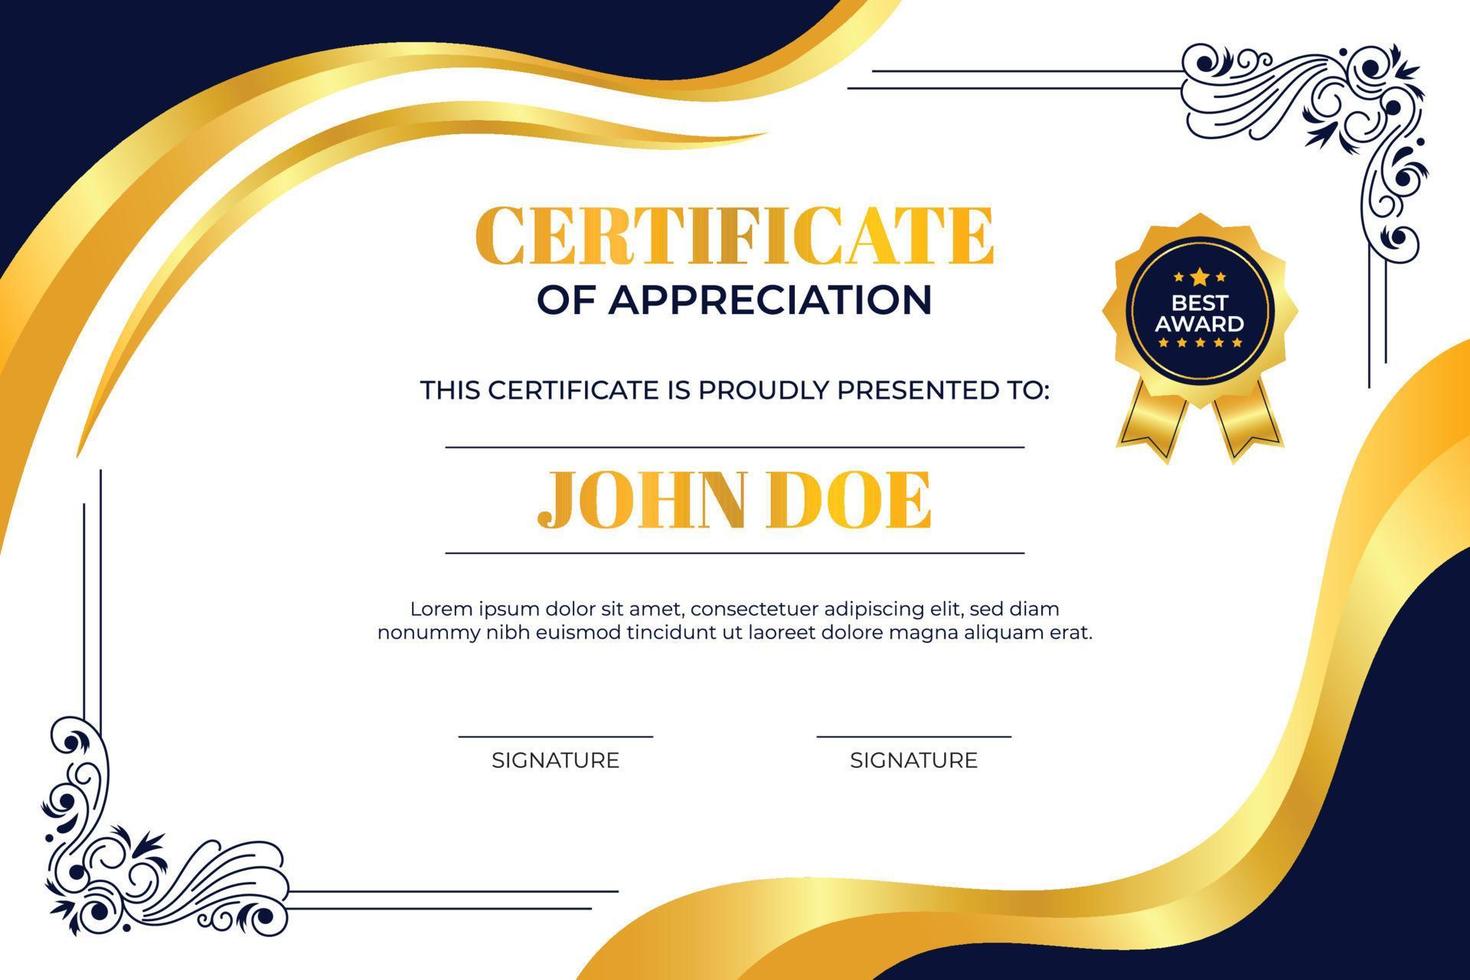 Certificate Of Appreciation Background With Golden Gradient and Ornaments vector